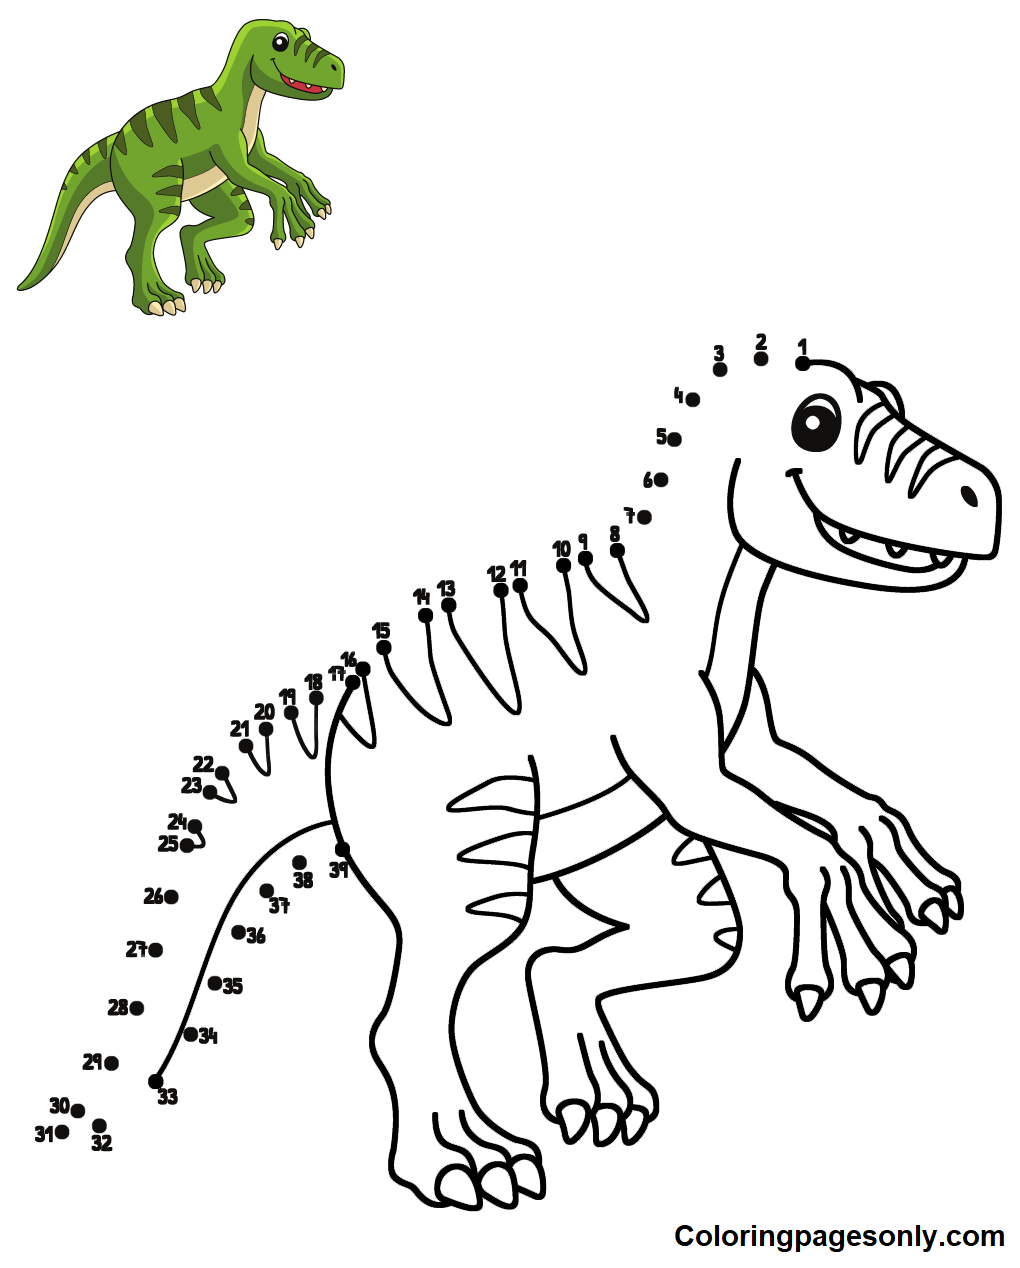 Dot to Dot Velociraptor Coloring Page